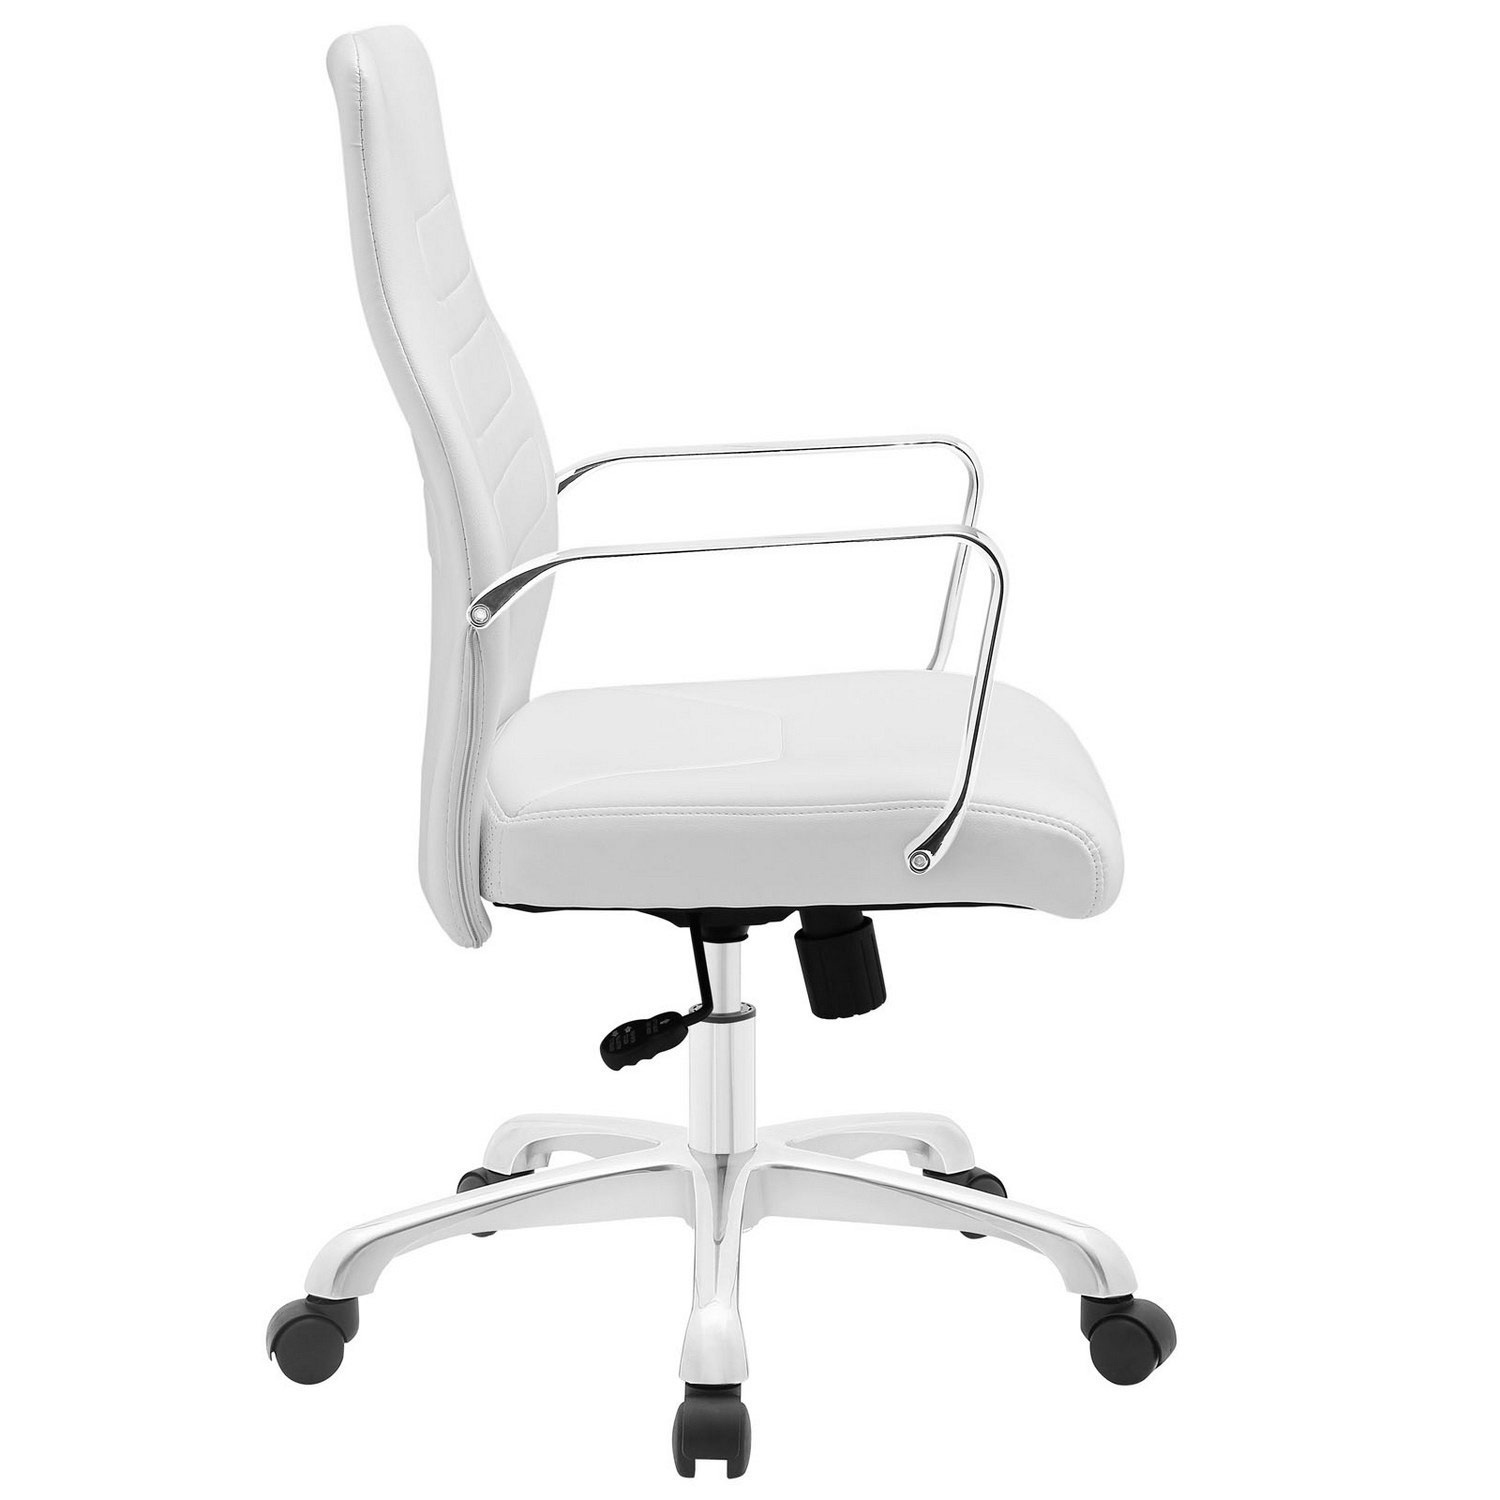 Modway Depict Mid Back Aluminum Office Chair - White